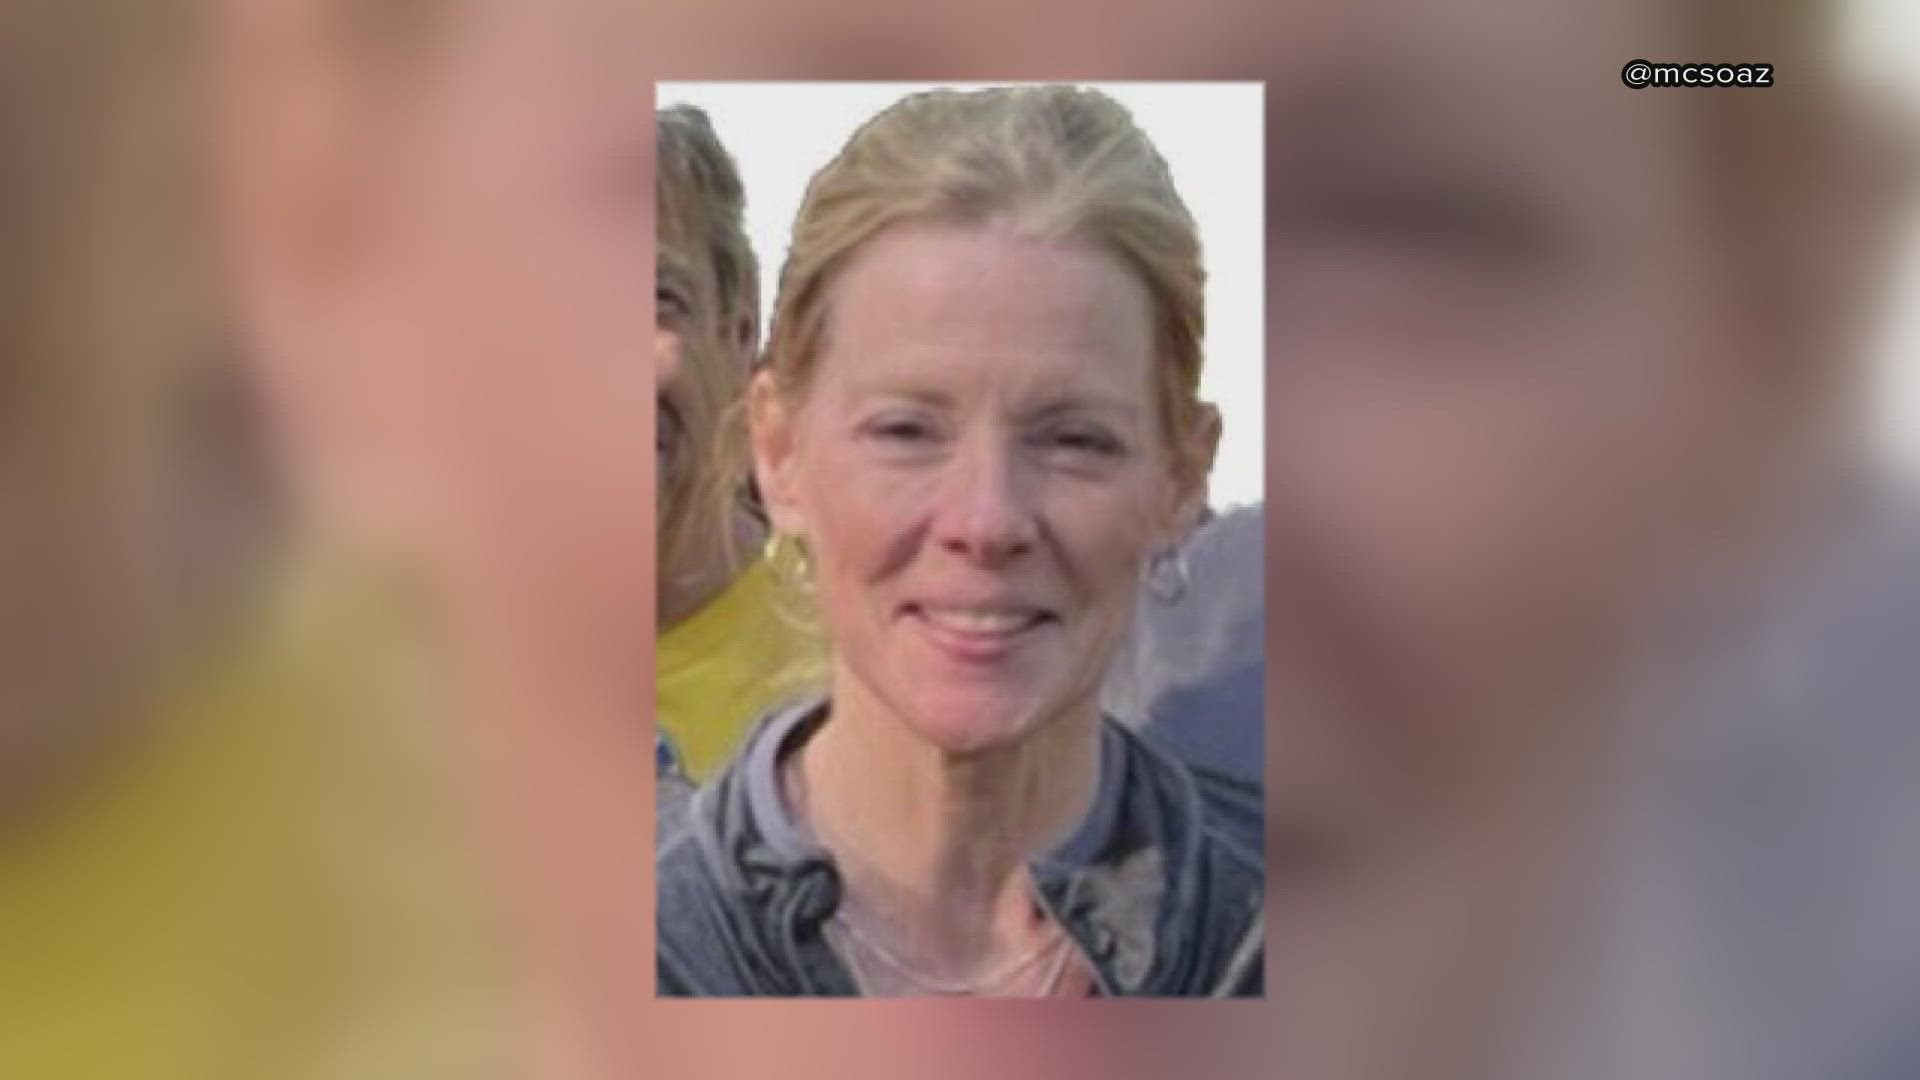 60-year-old Kathleen Patterson has been missing since Sunday. There are no signs of foul play, officials say.